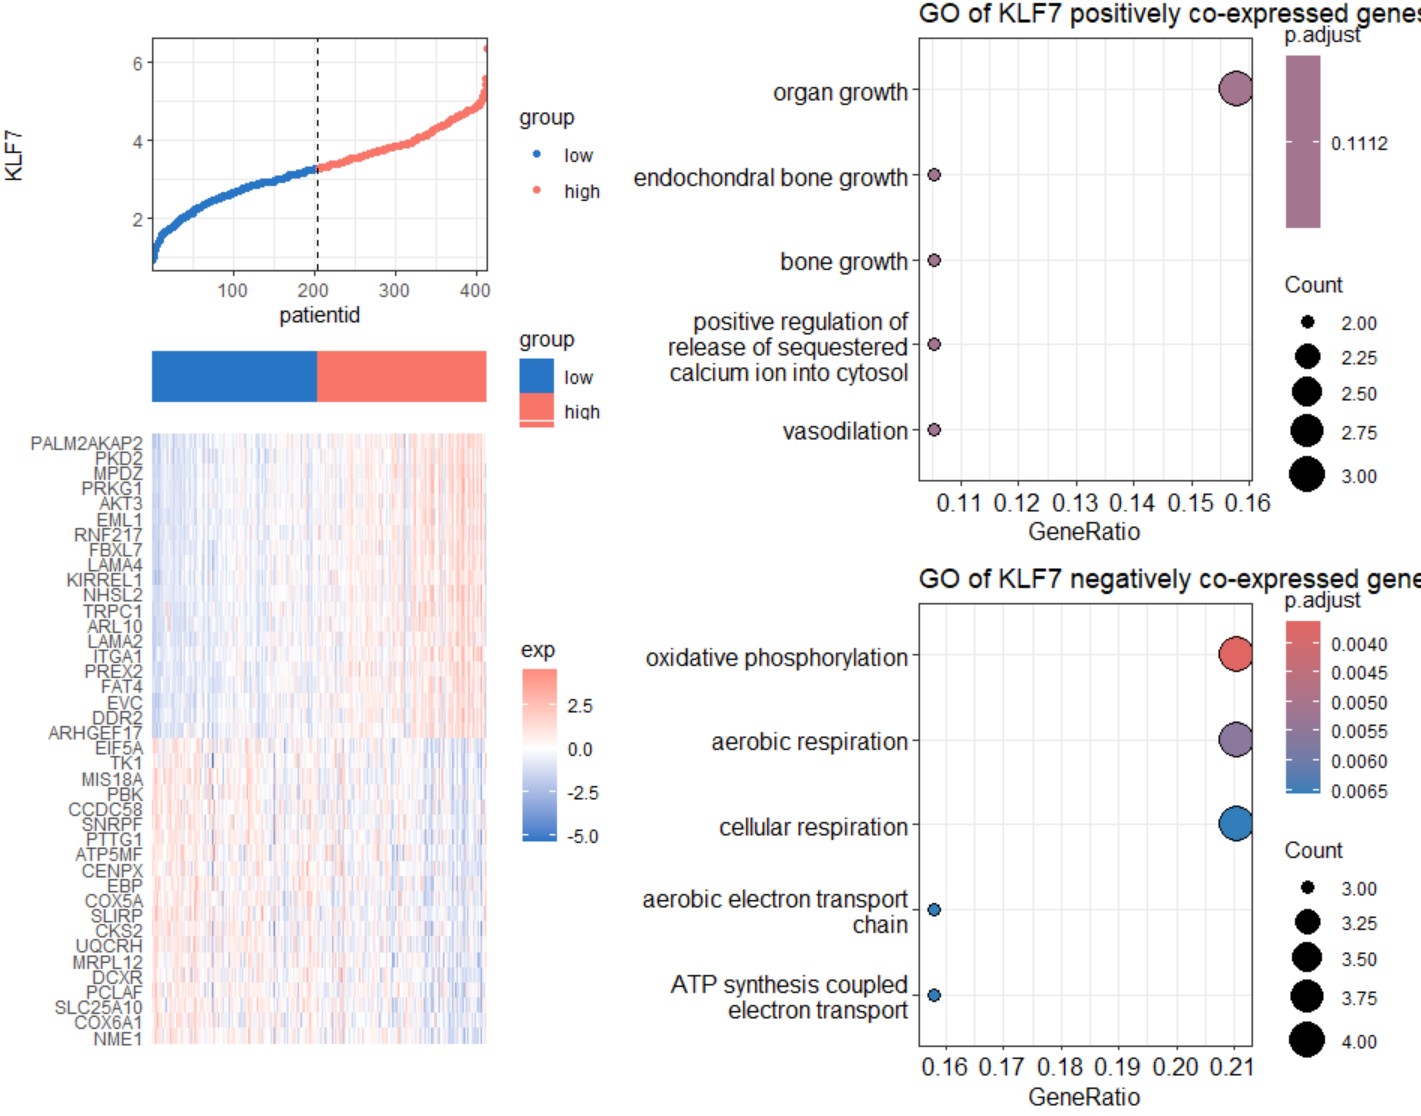 Heatmap and Go enrichment of co-expressed genes of KLF7 in STAD